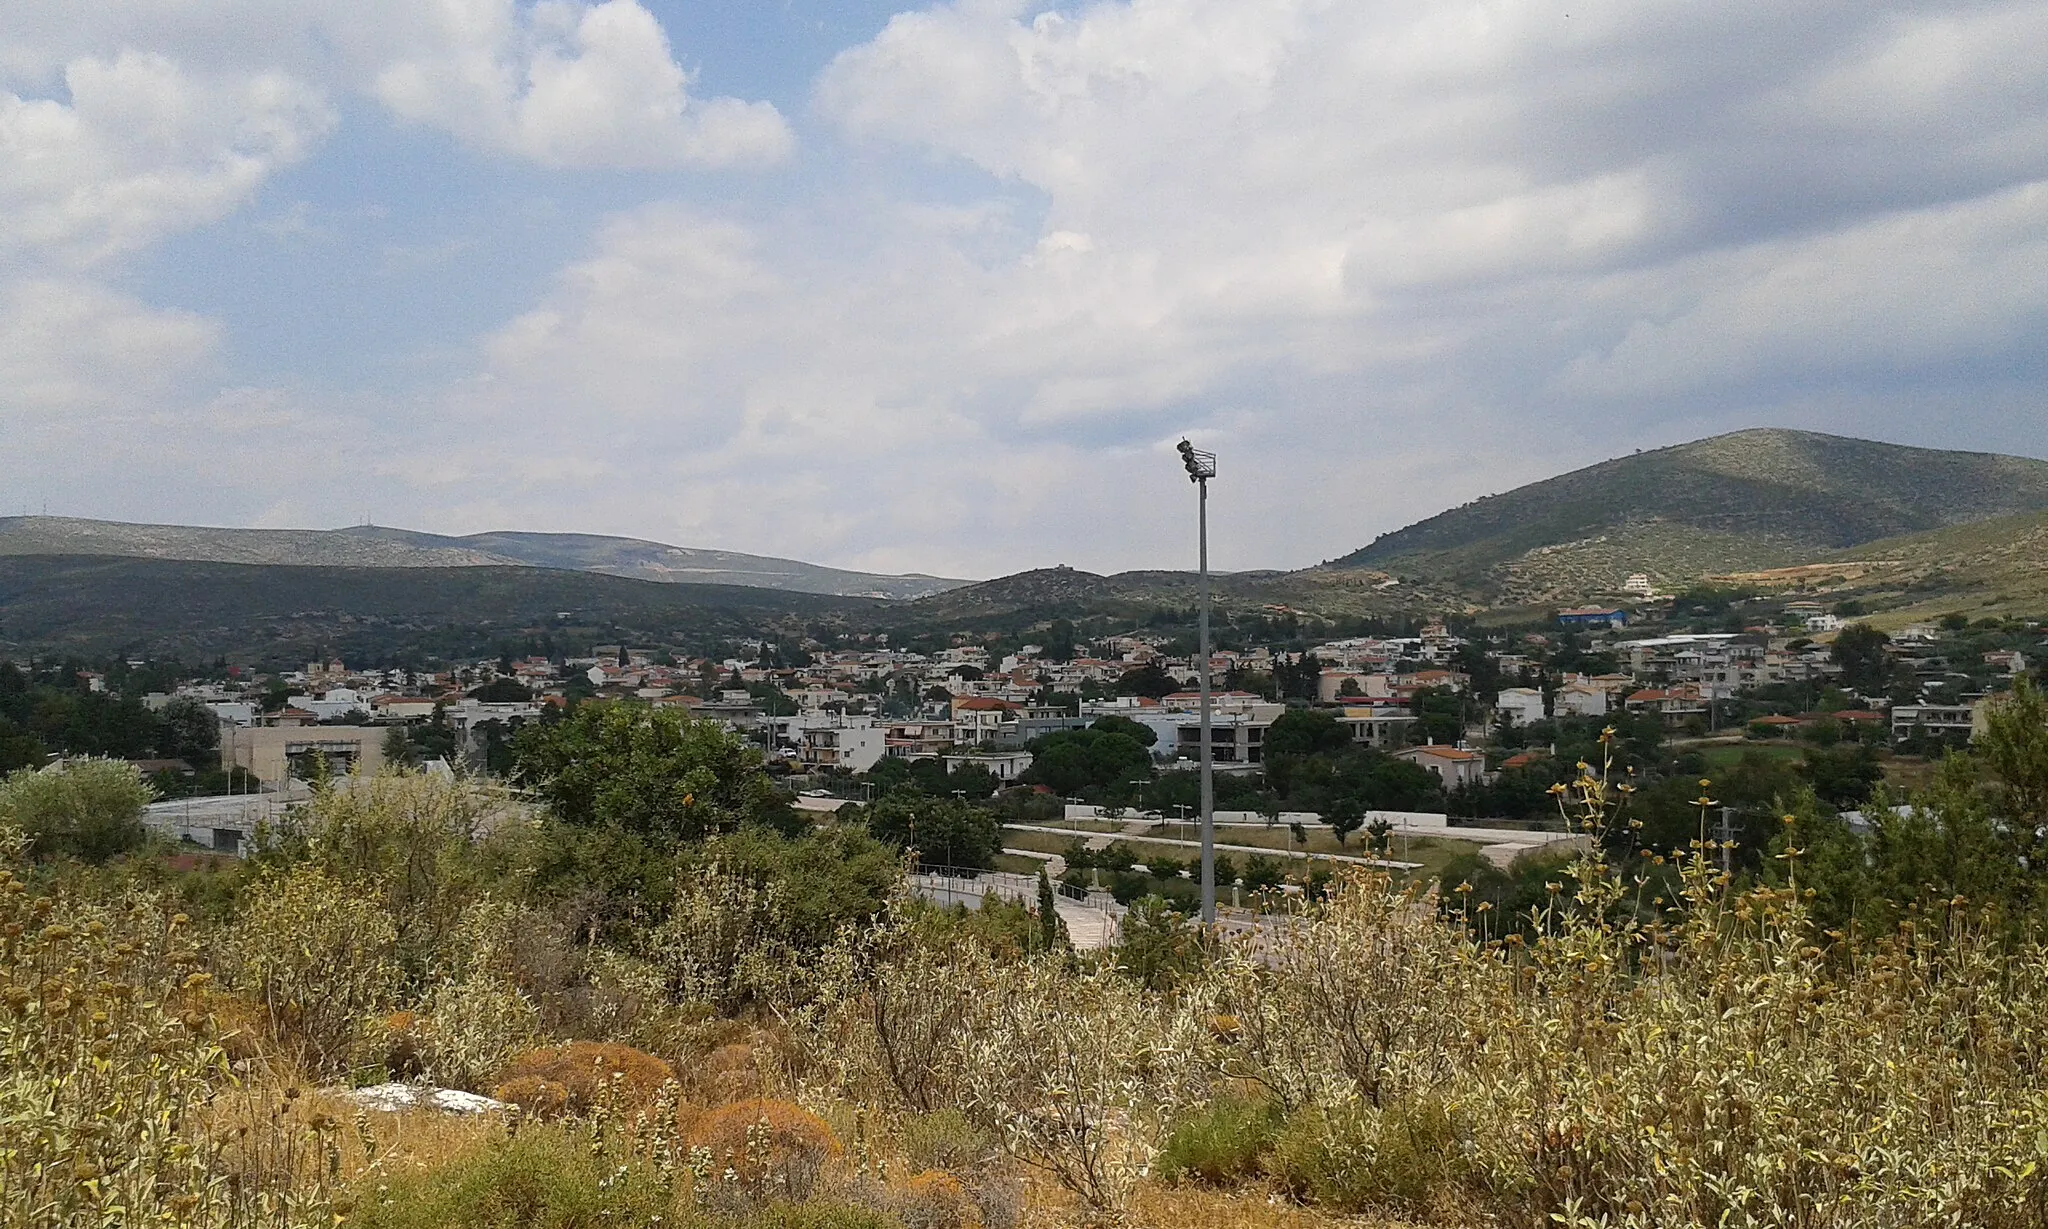 Photo showing: The town of Marathon, Greece